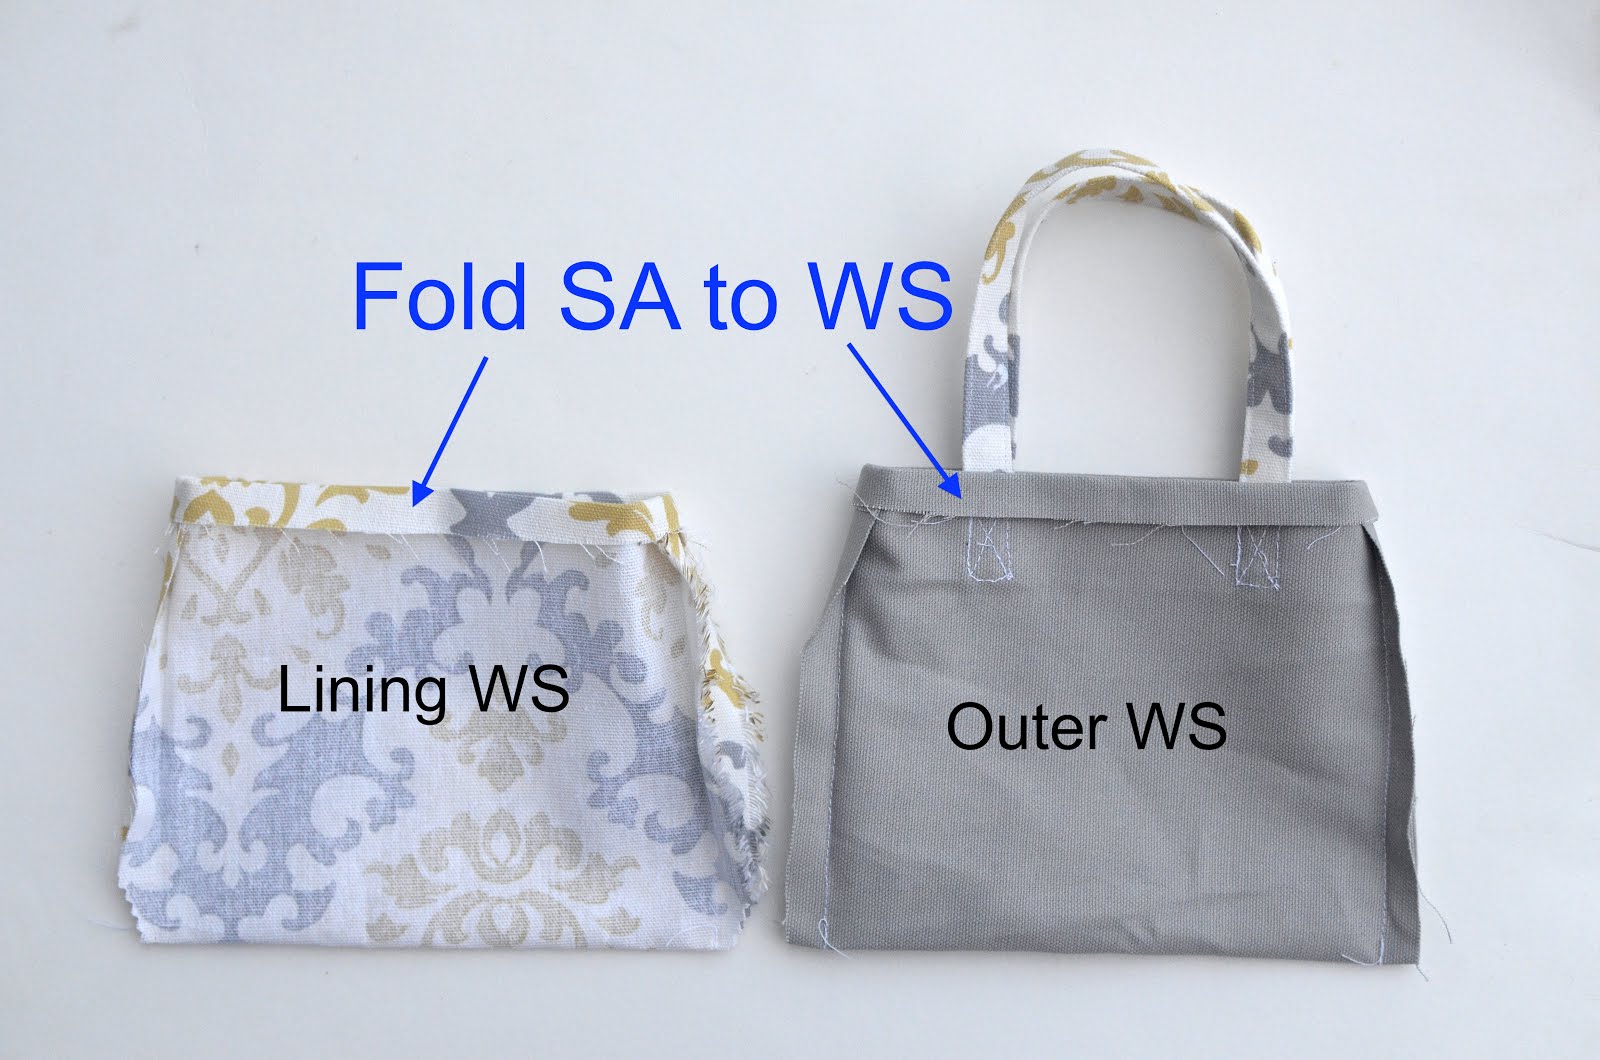 second bag is made out of lining fabric, identical to the outer bag ...